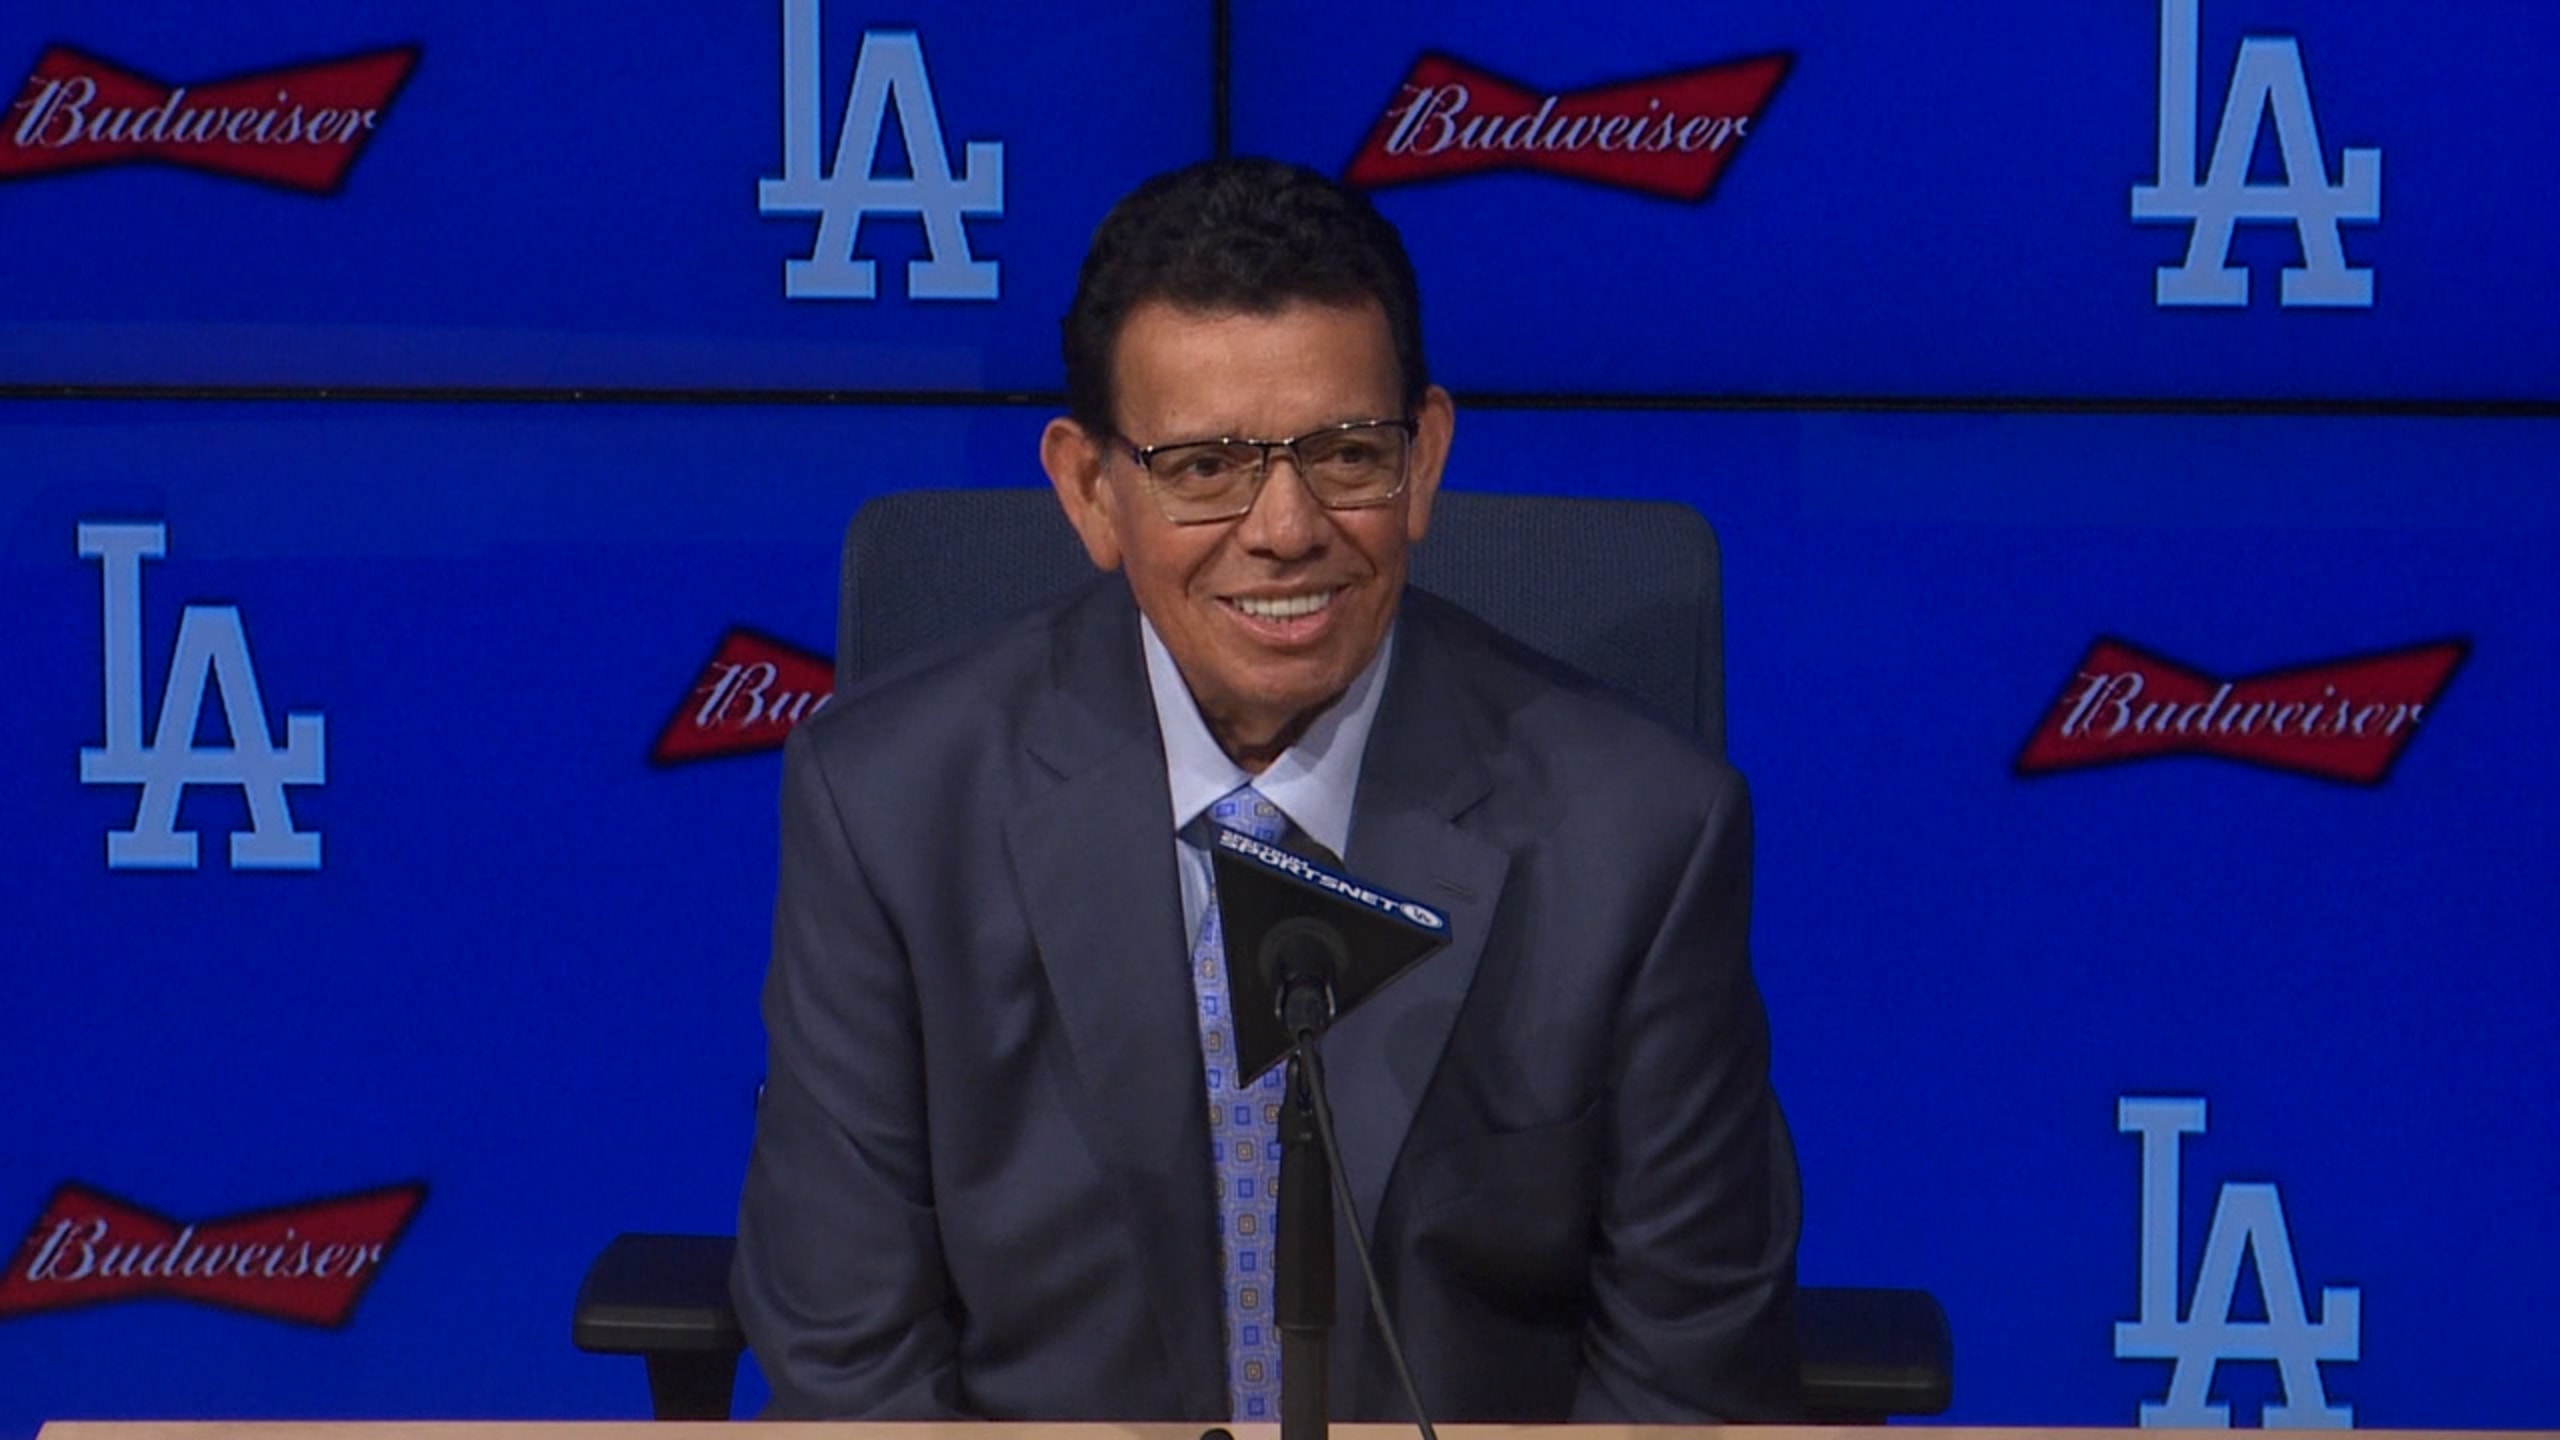 The Dodgers are retiring Fernando Valenzuela's number. Does he have a path  to Cooperstown?, National Sports